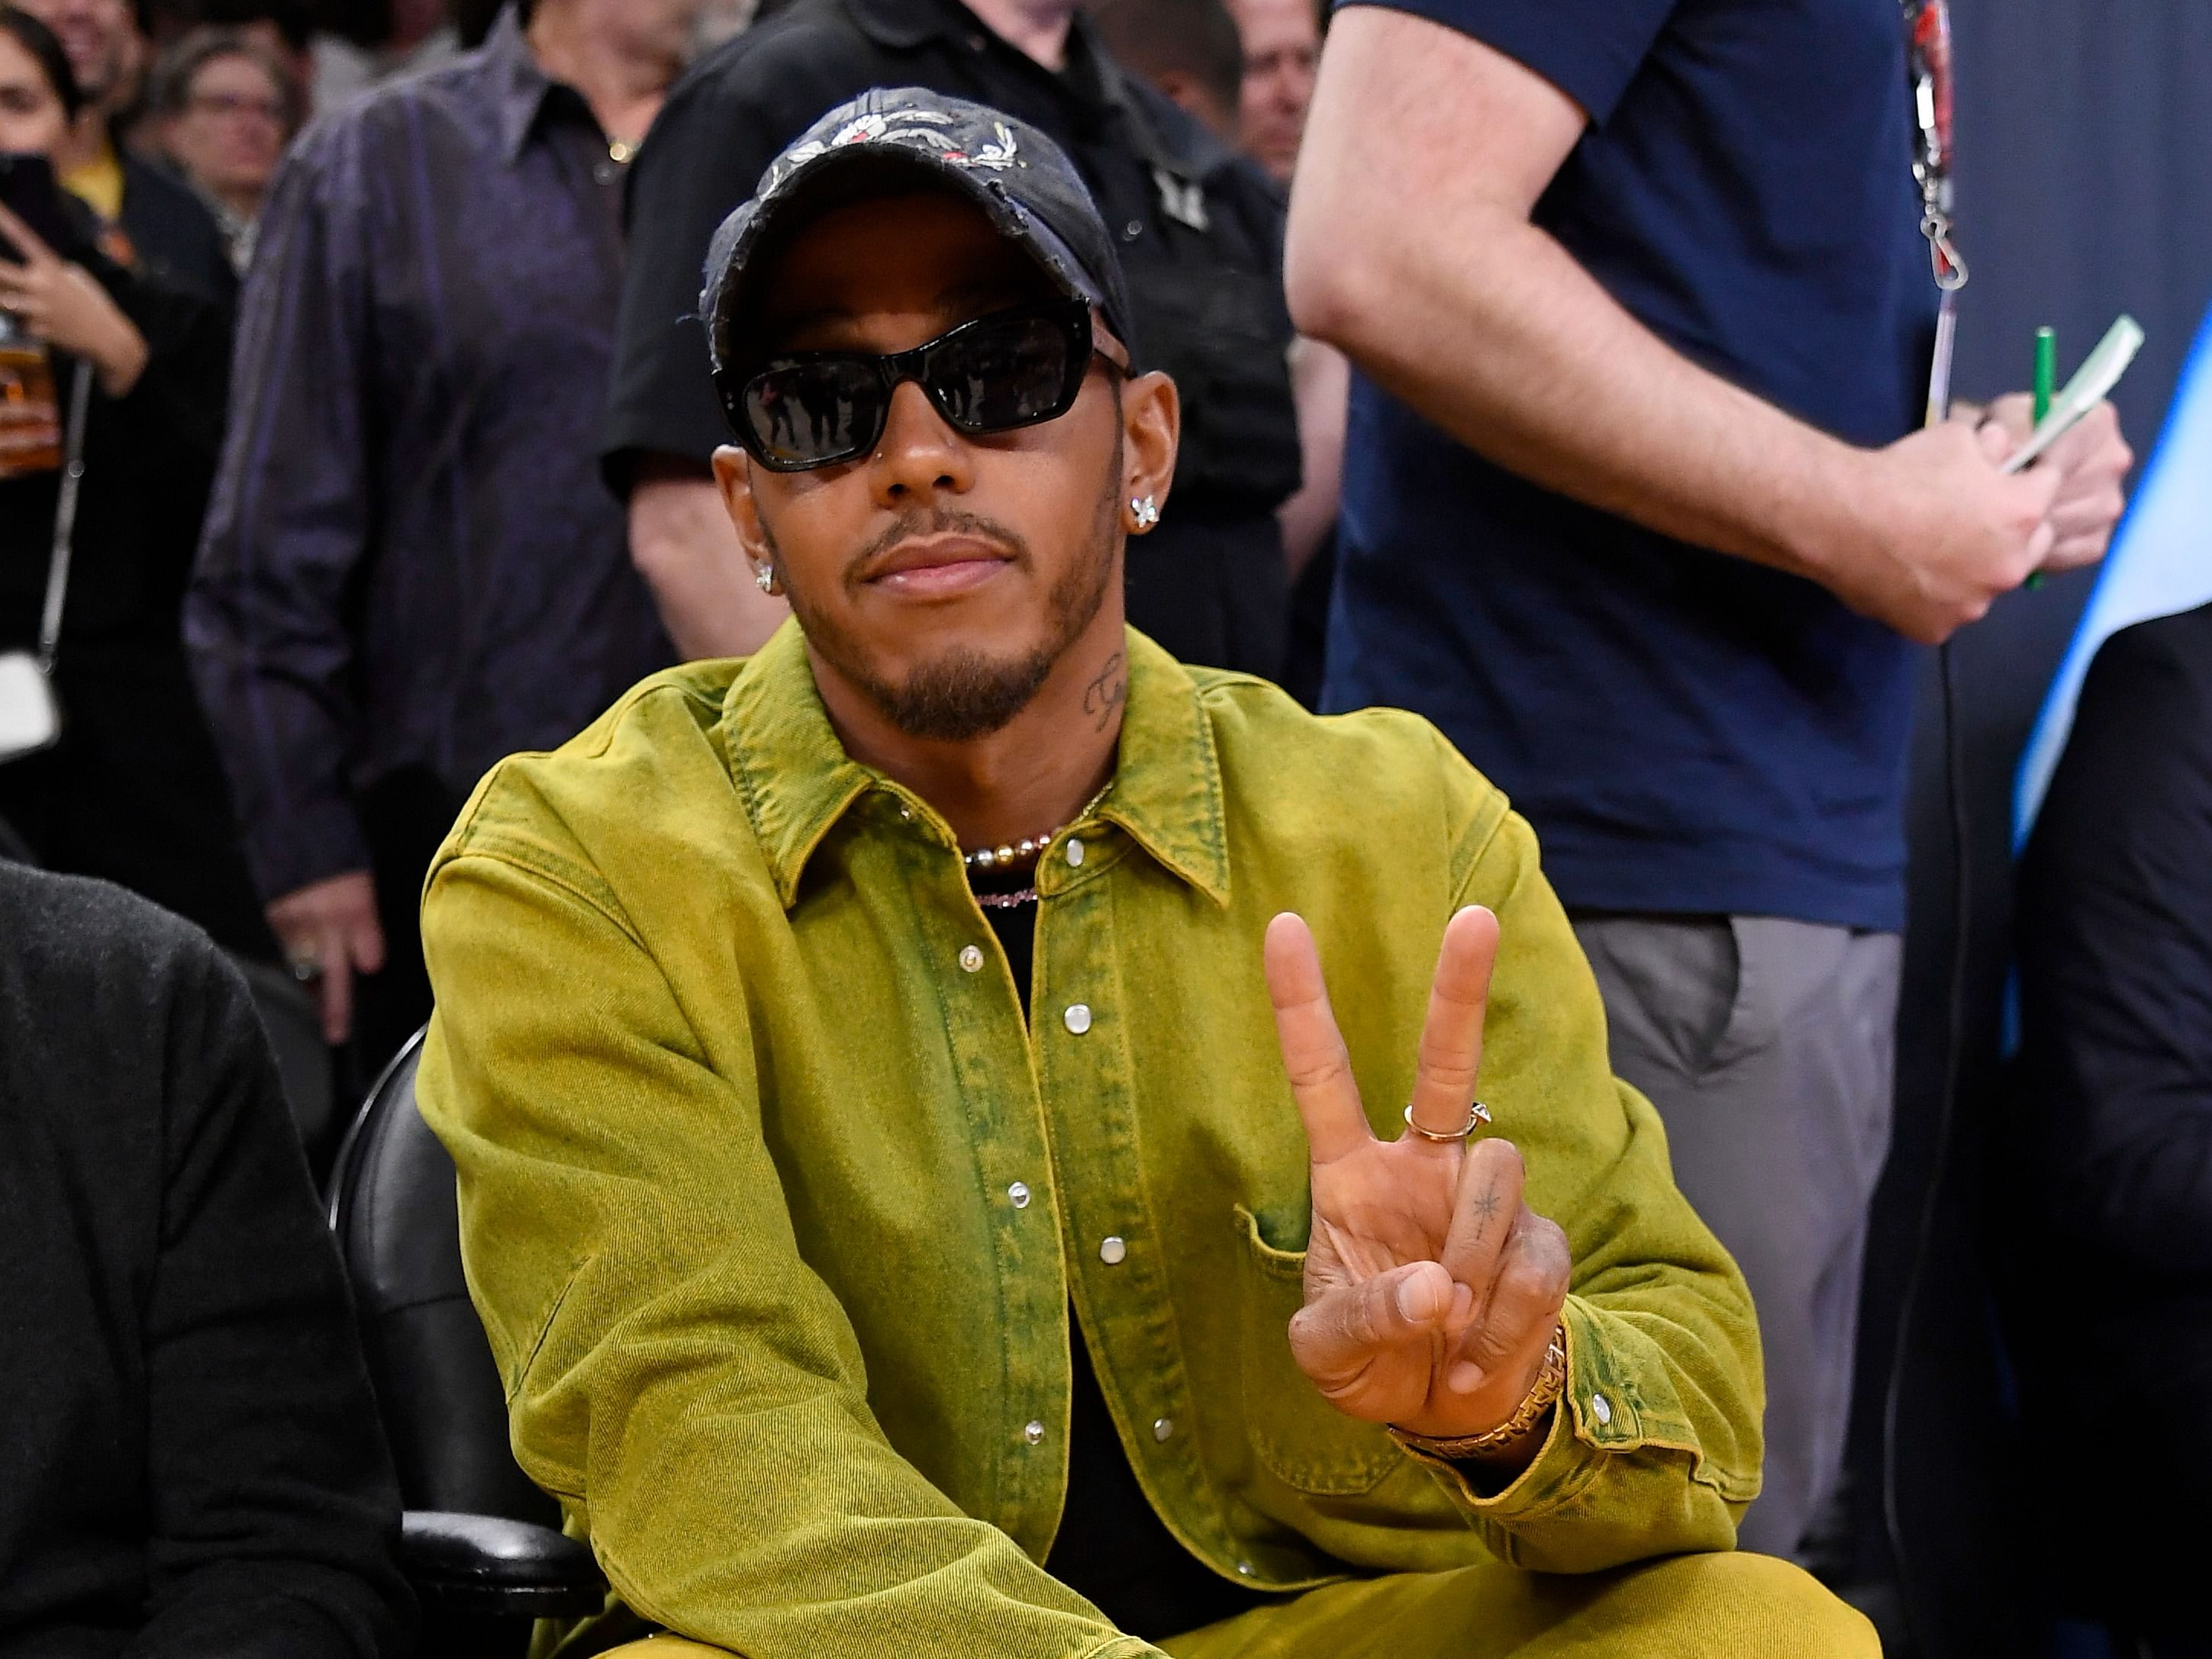 Lewis Hamilton attends the Los Angeles Lakers and Golden State Warriors game. (Photo by Kevork Djansezian/Getty Images)